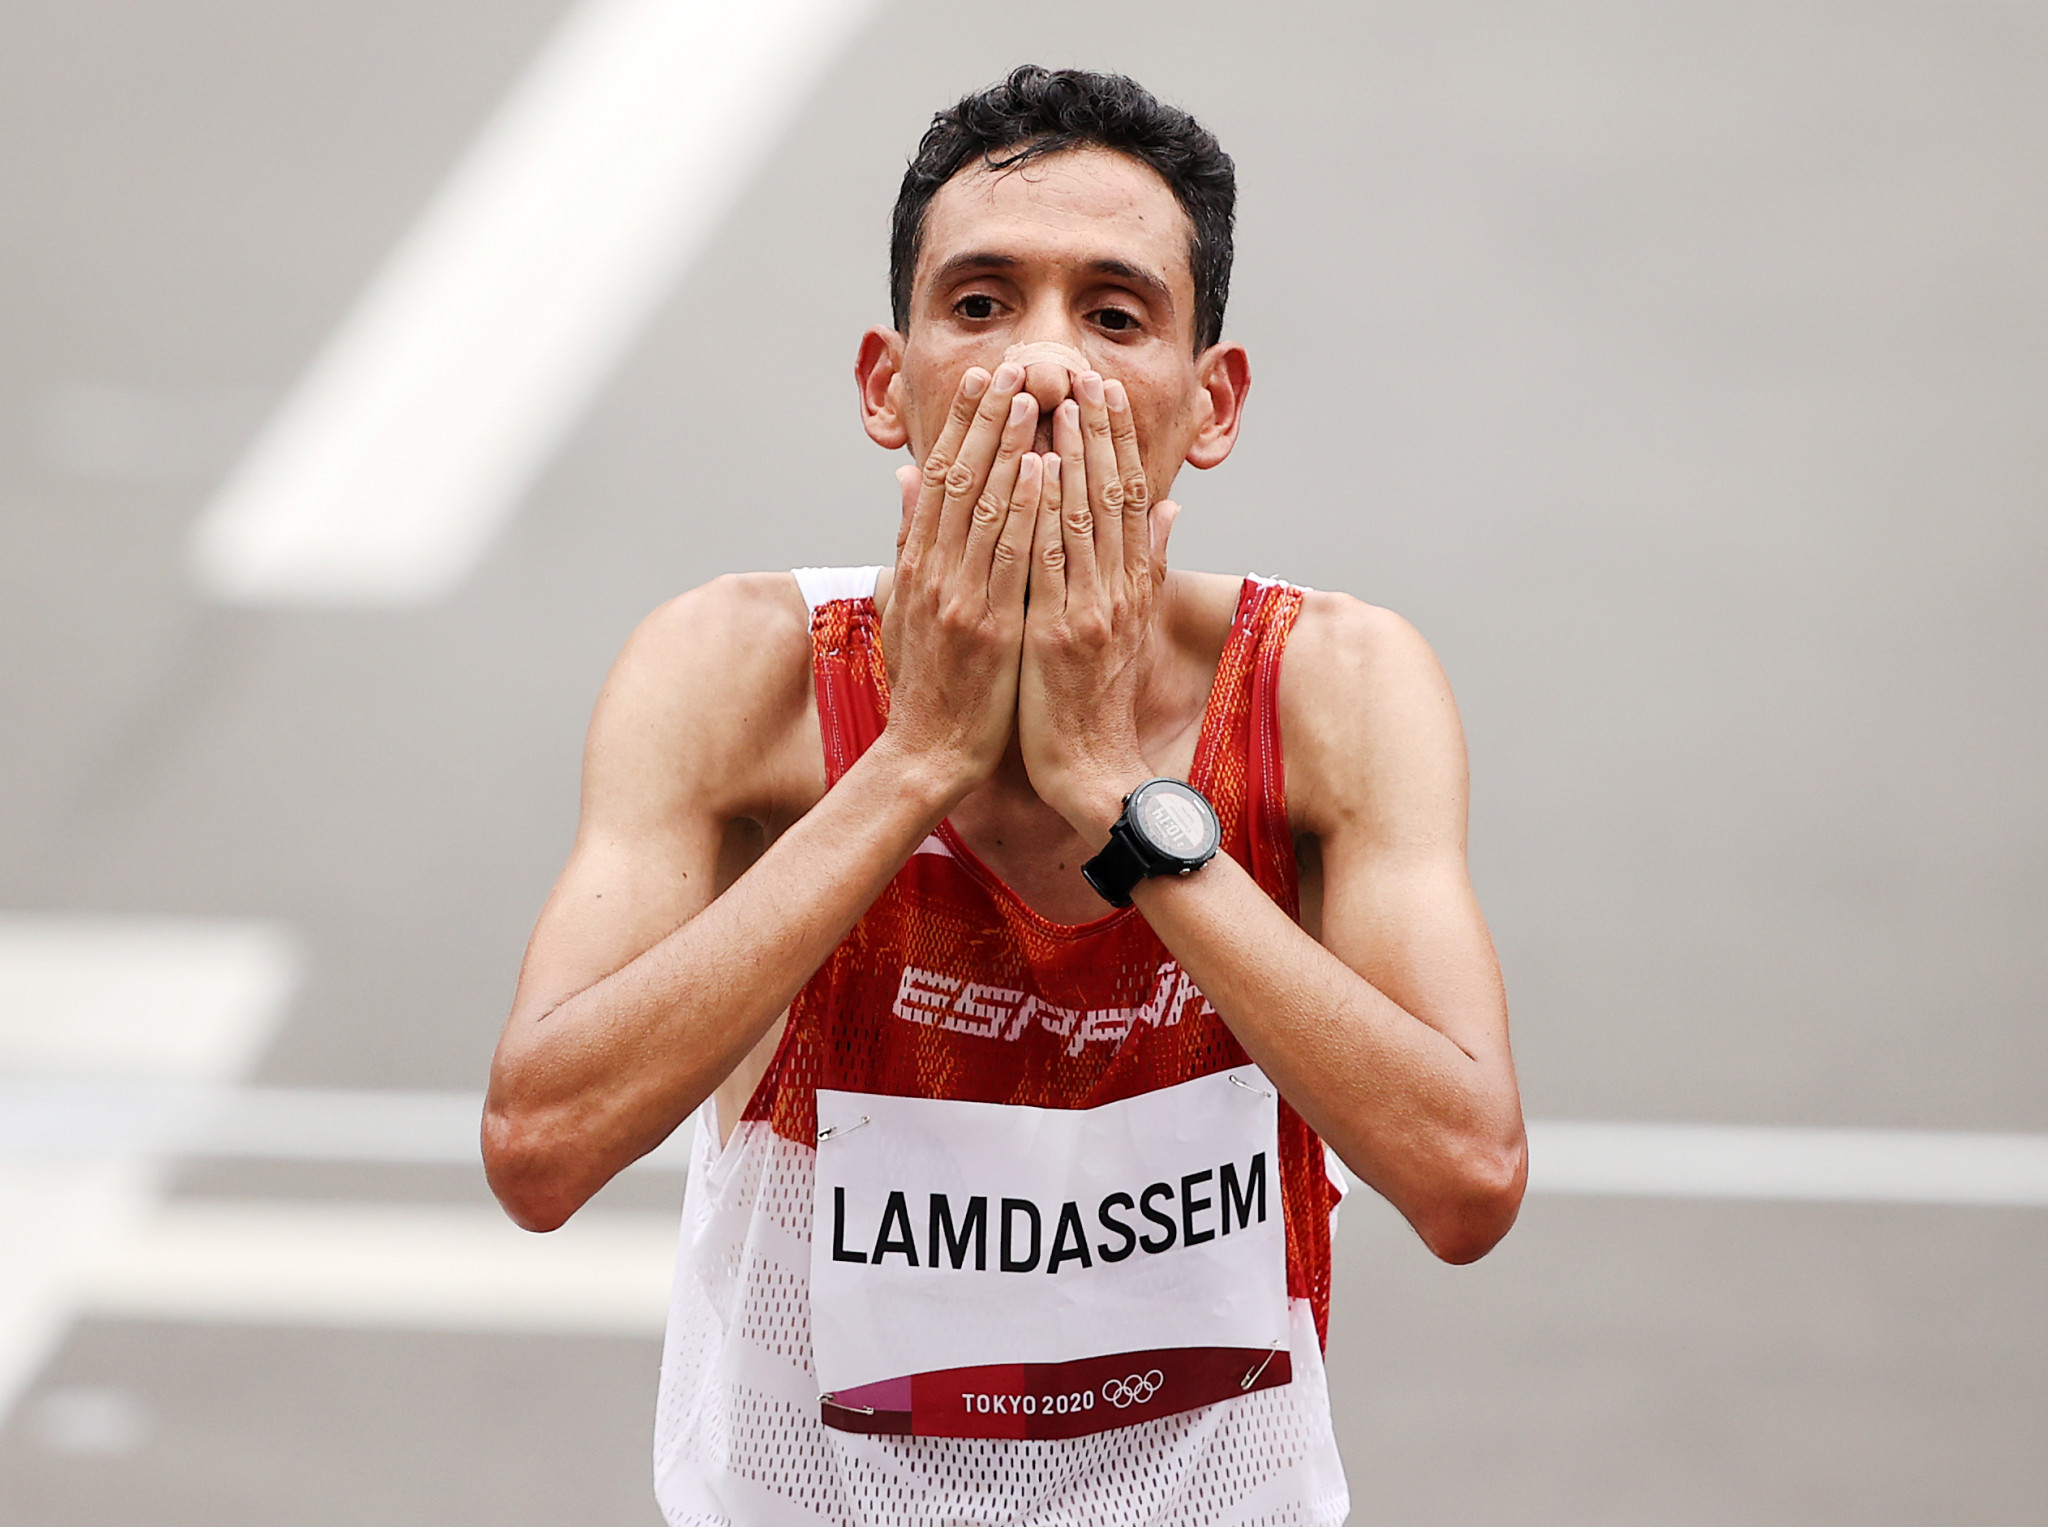 Ayad Lamdassem hopes to be the champion of the men's marathon at Munich 2022 ©Getty Images